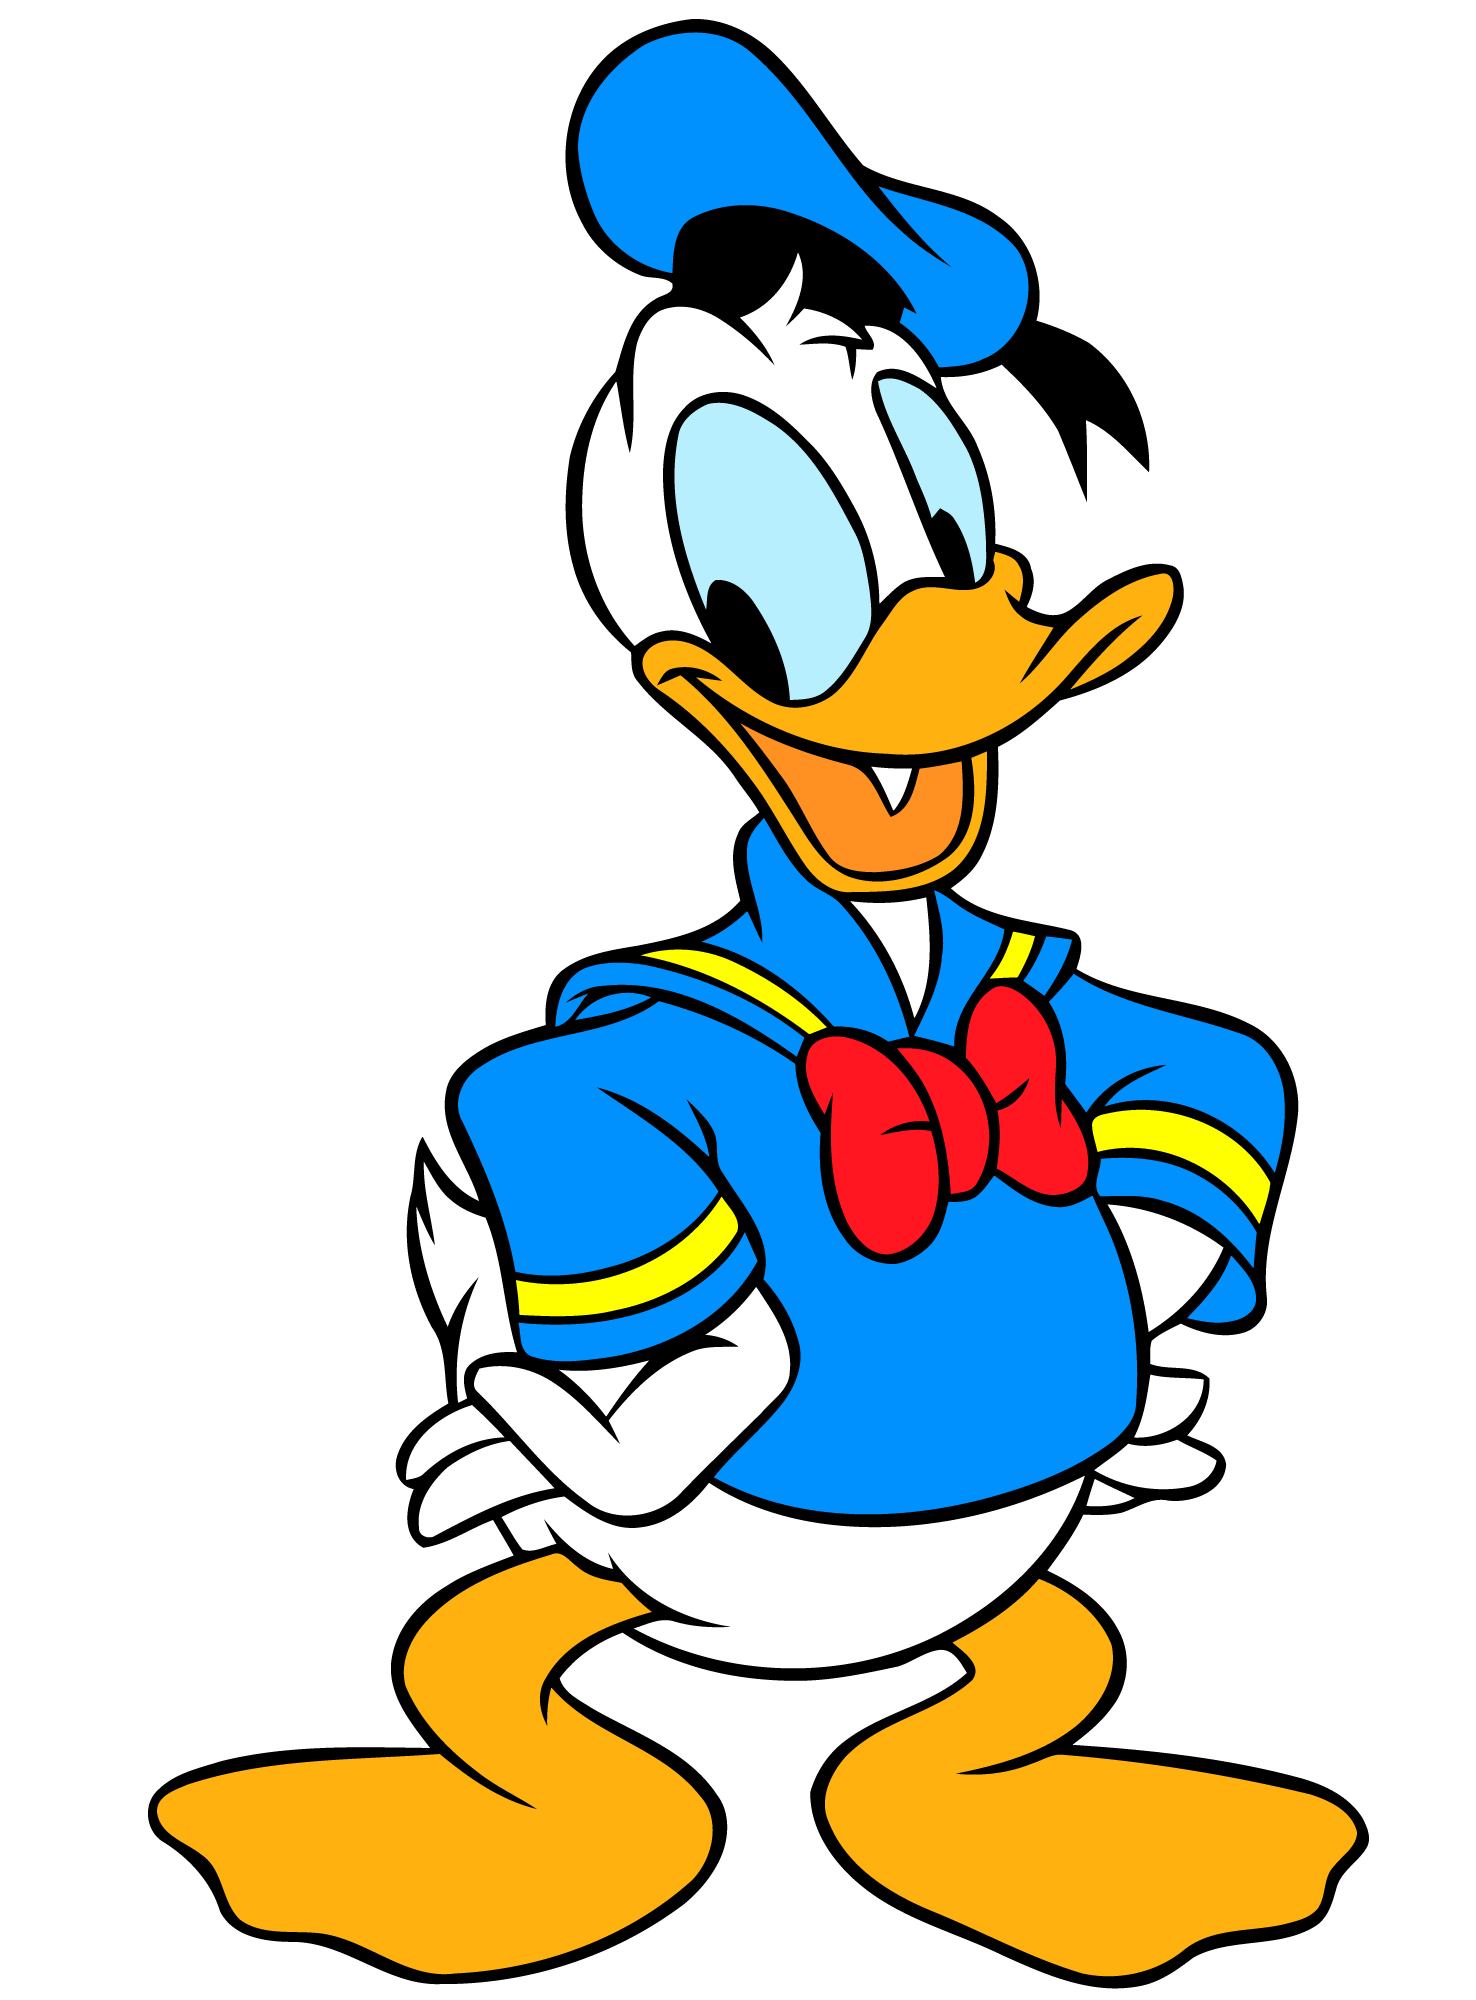 Donald hd wallpapers k. Home clipart duck